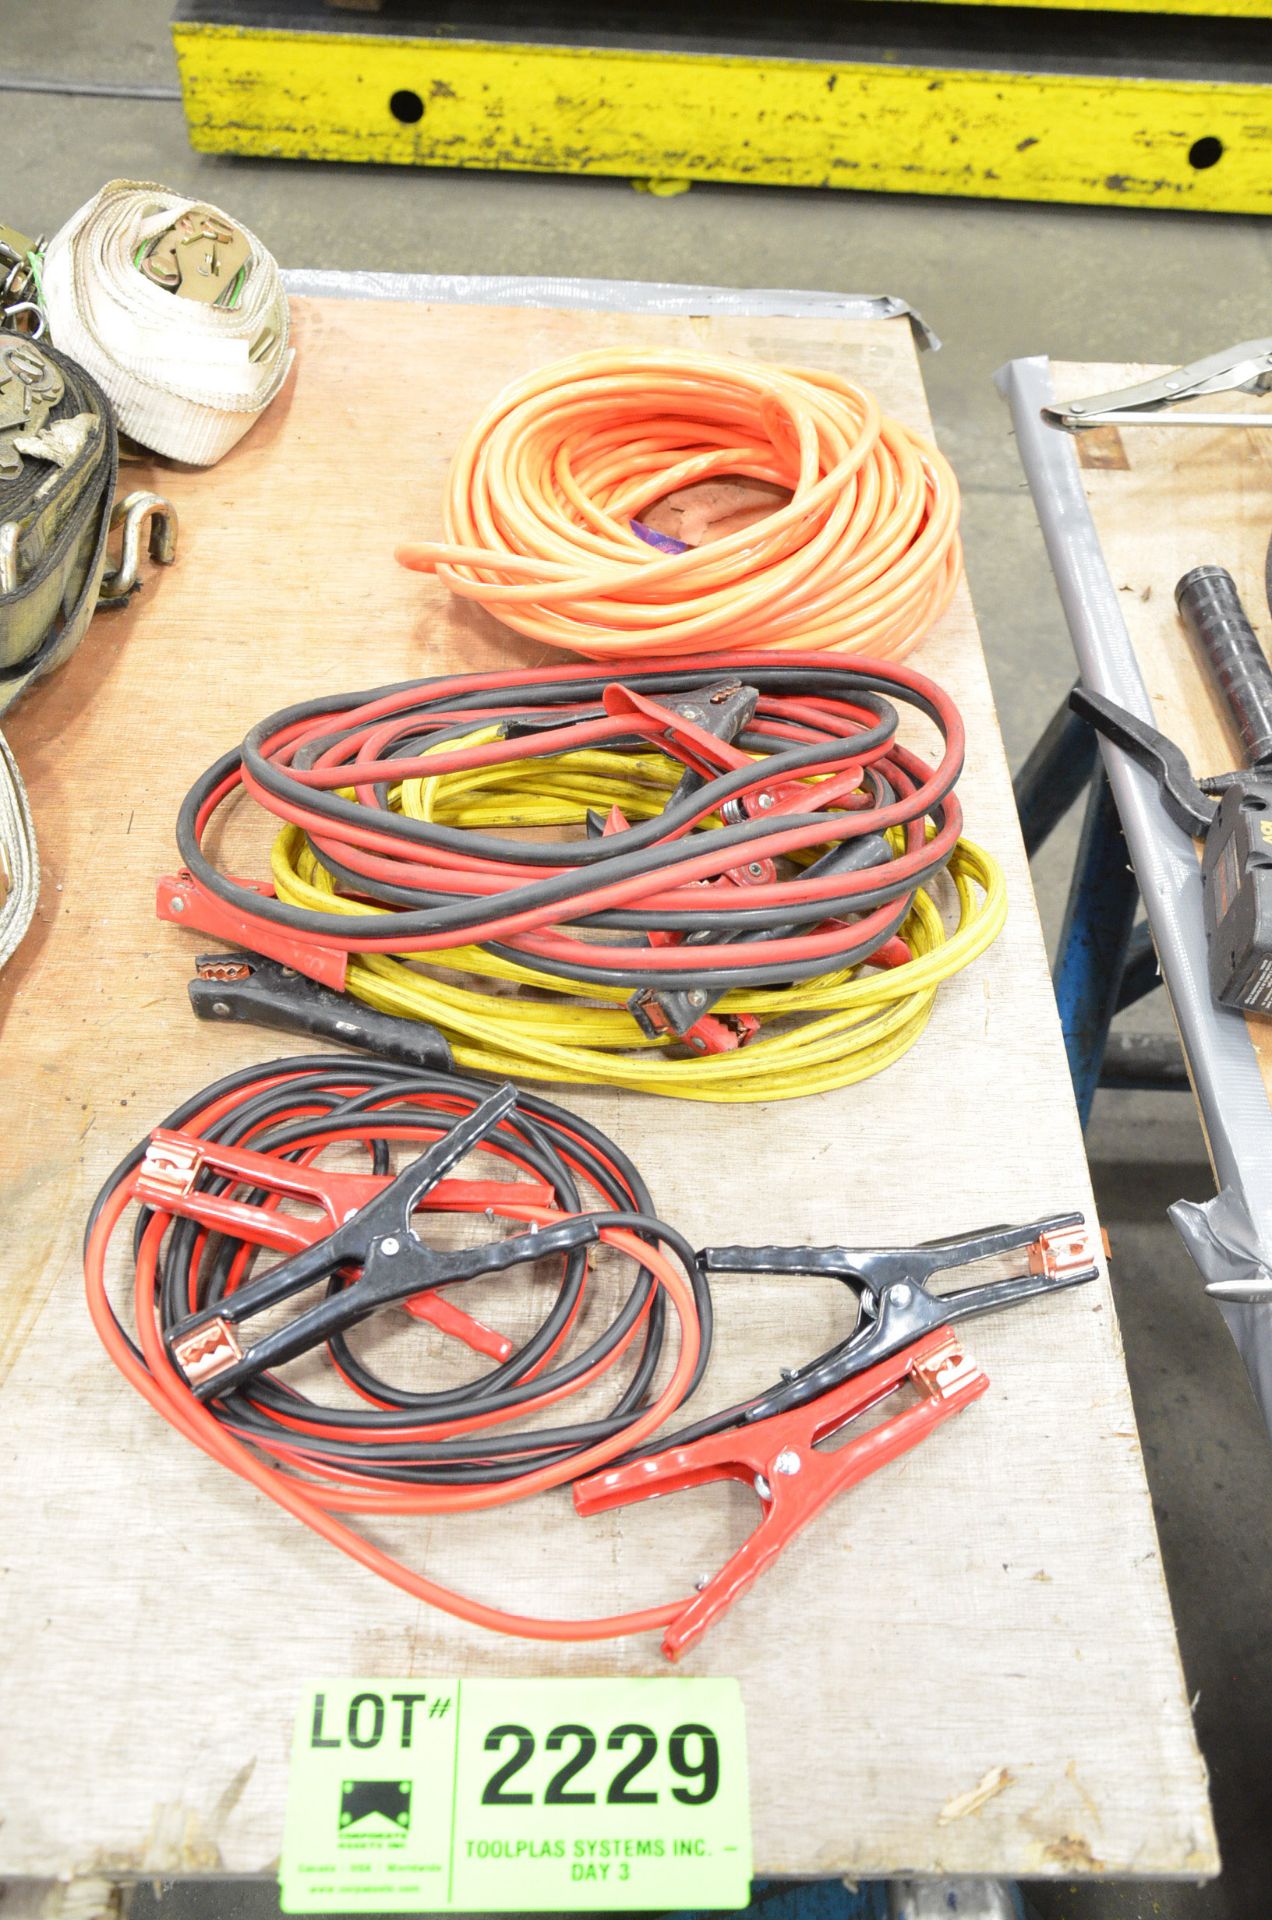 LOT/ BOOSTER CABLES AND EXTENSION CORD